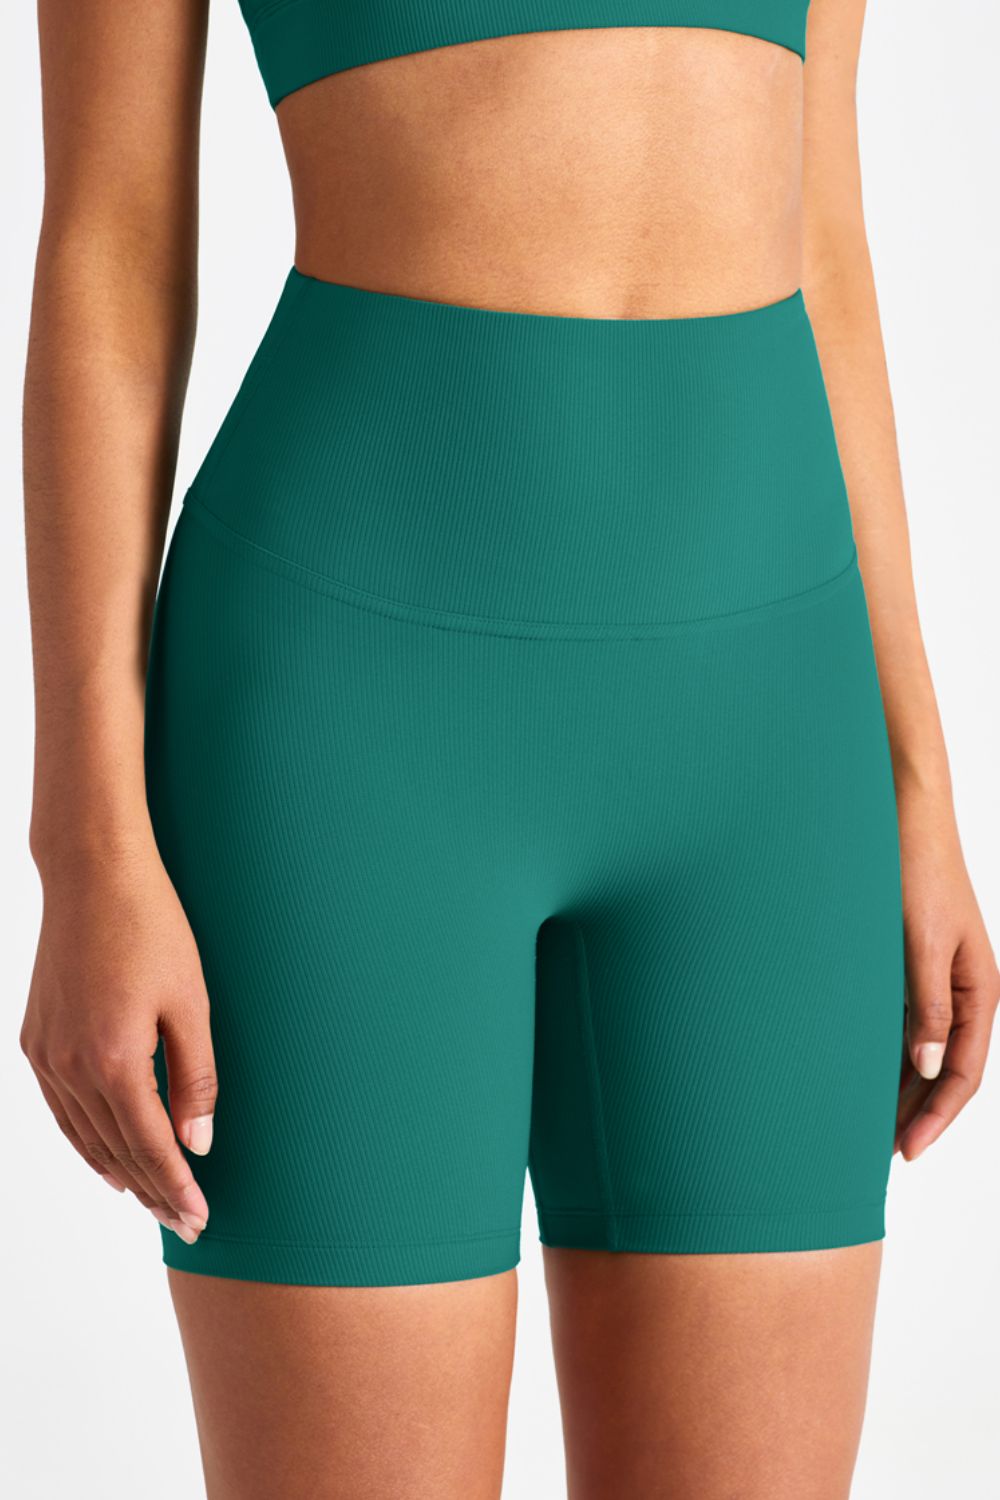 Wide Waistband Sports Shorts  Sunset and Swim Teal 4 